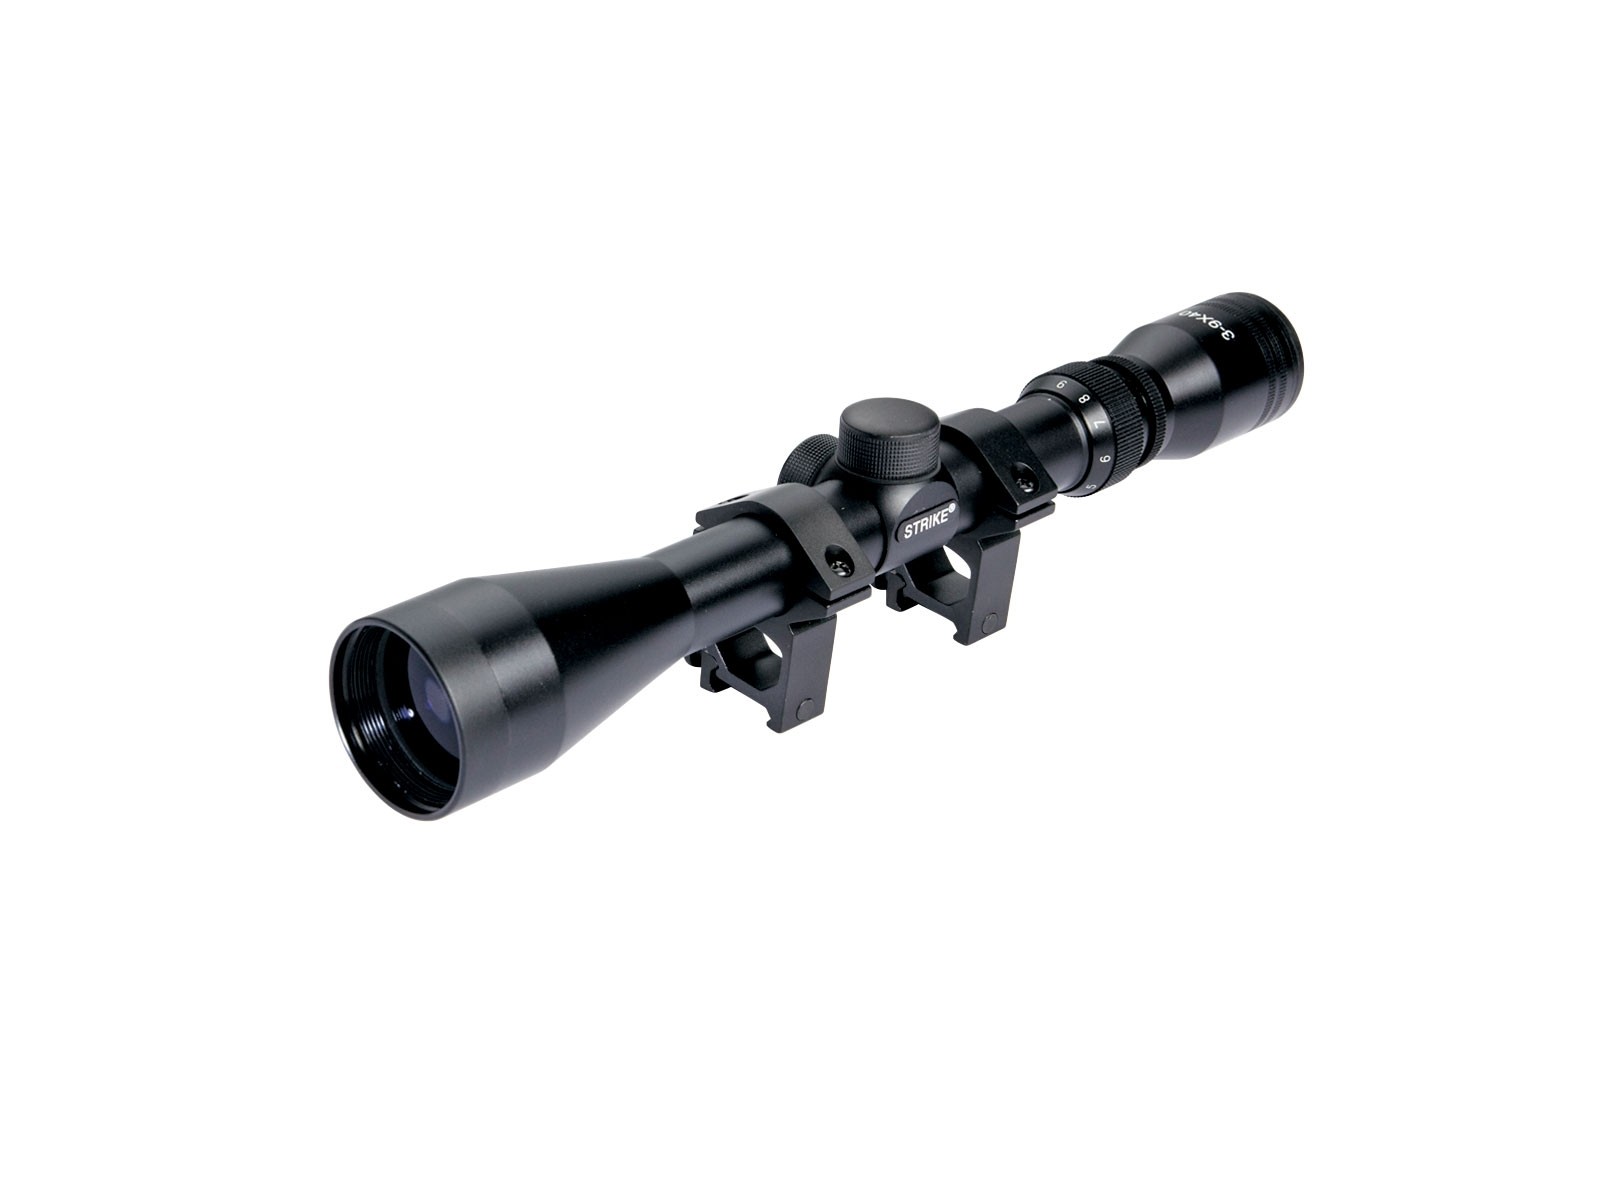 STRIKE SYSTEMS Scope 3-9 x 40 inc. Mount Rings